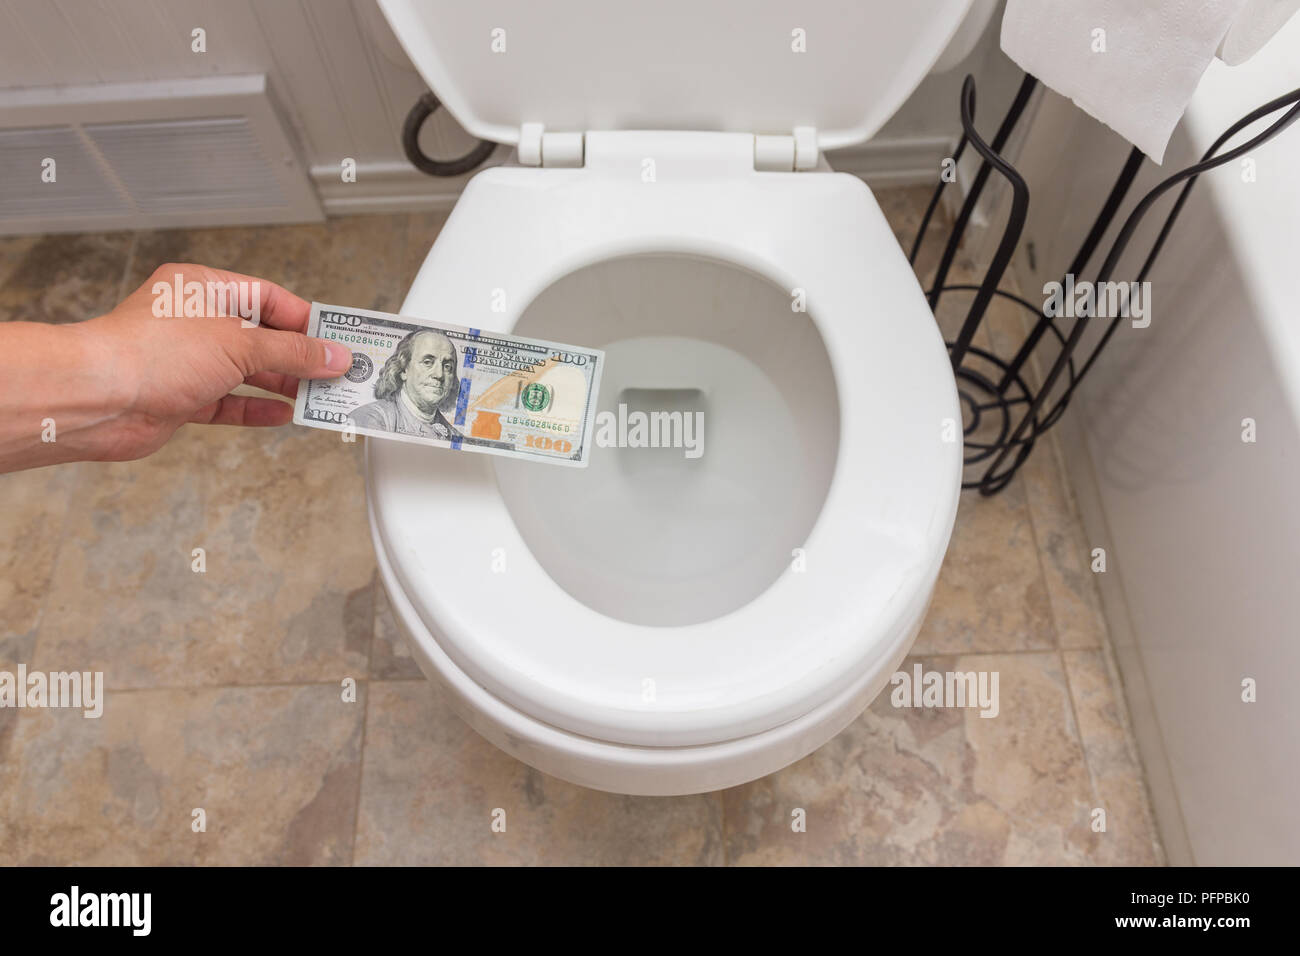 Holding crisp one hundred dollar bill into toilet; clena and bright; finance concept Stock Photo